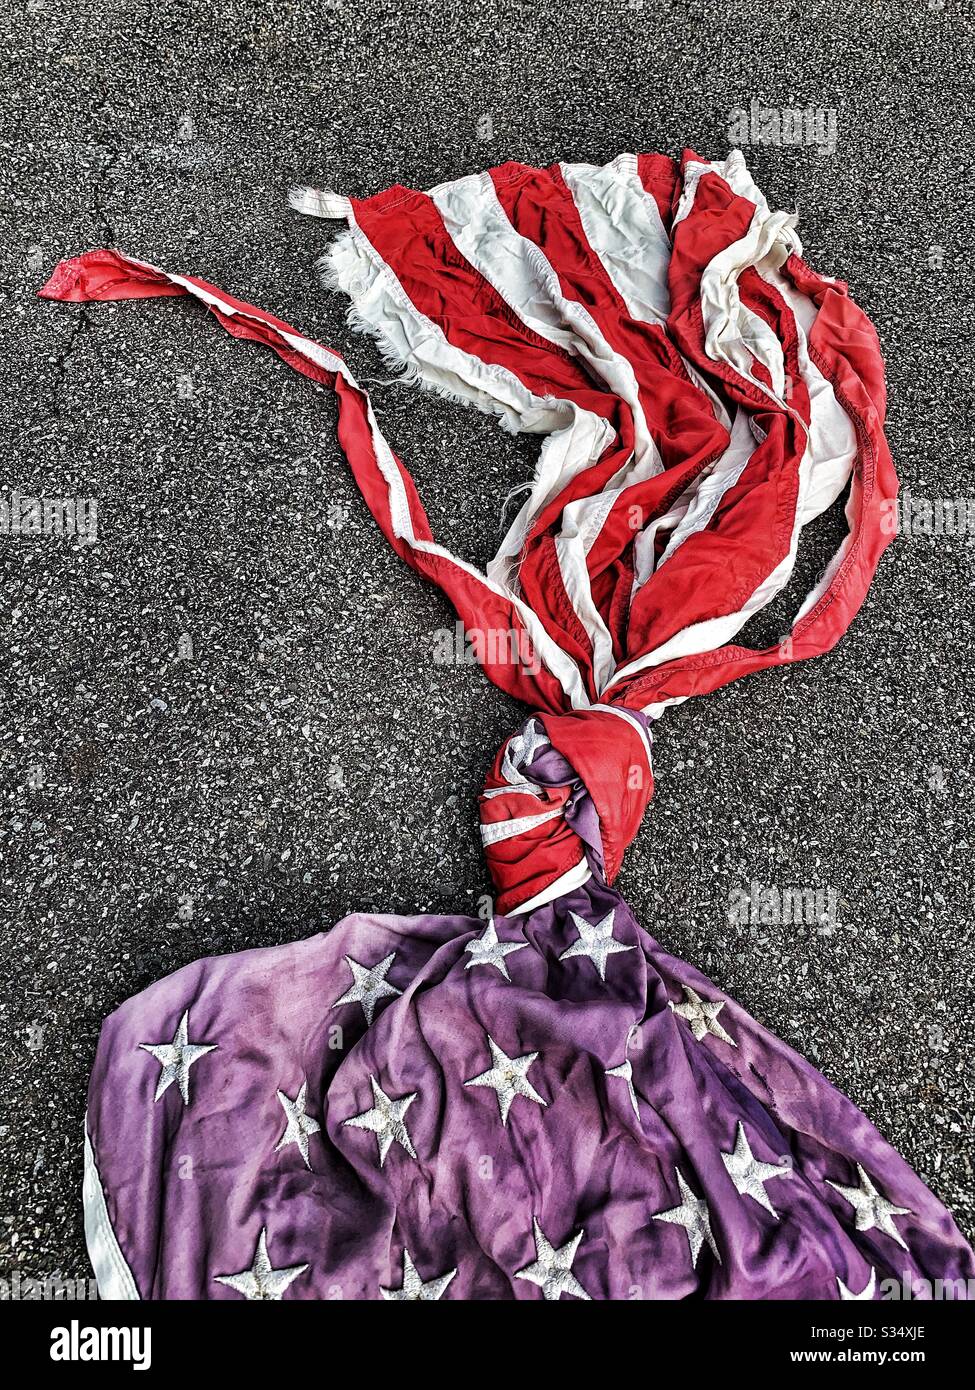 Torn American flag flag tied in a knot Stock Photo